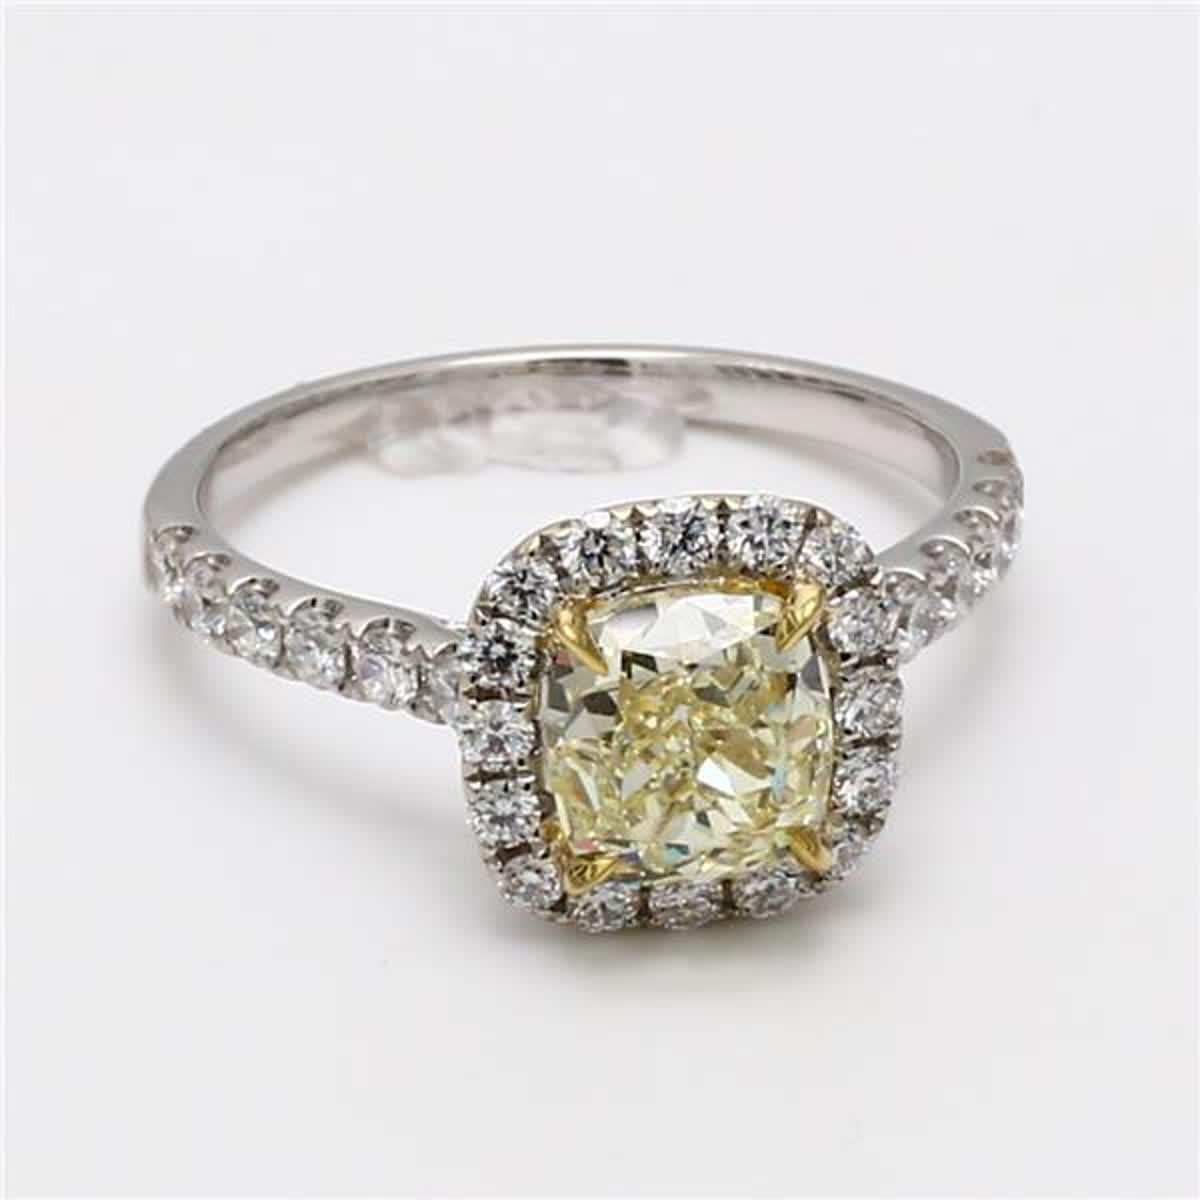 Cushion Cut GIA Certified Natural Yellow Cushion and White Diamond 2.14 Carat TW Gold Ring